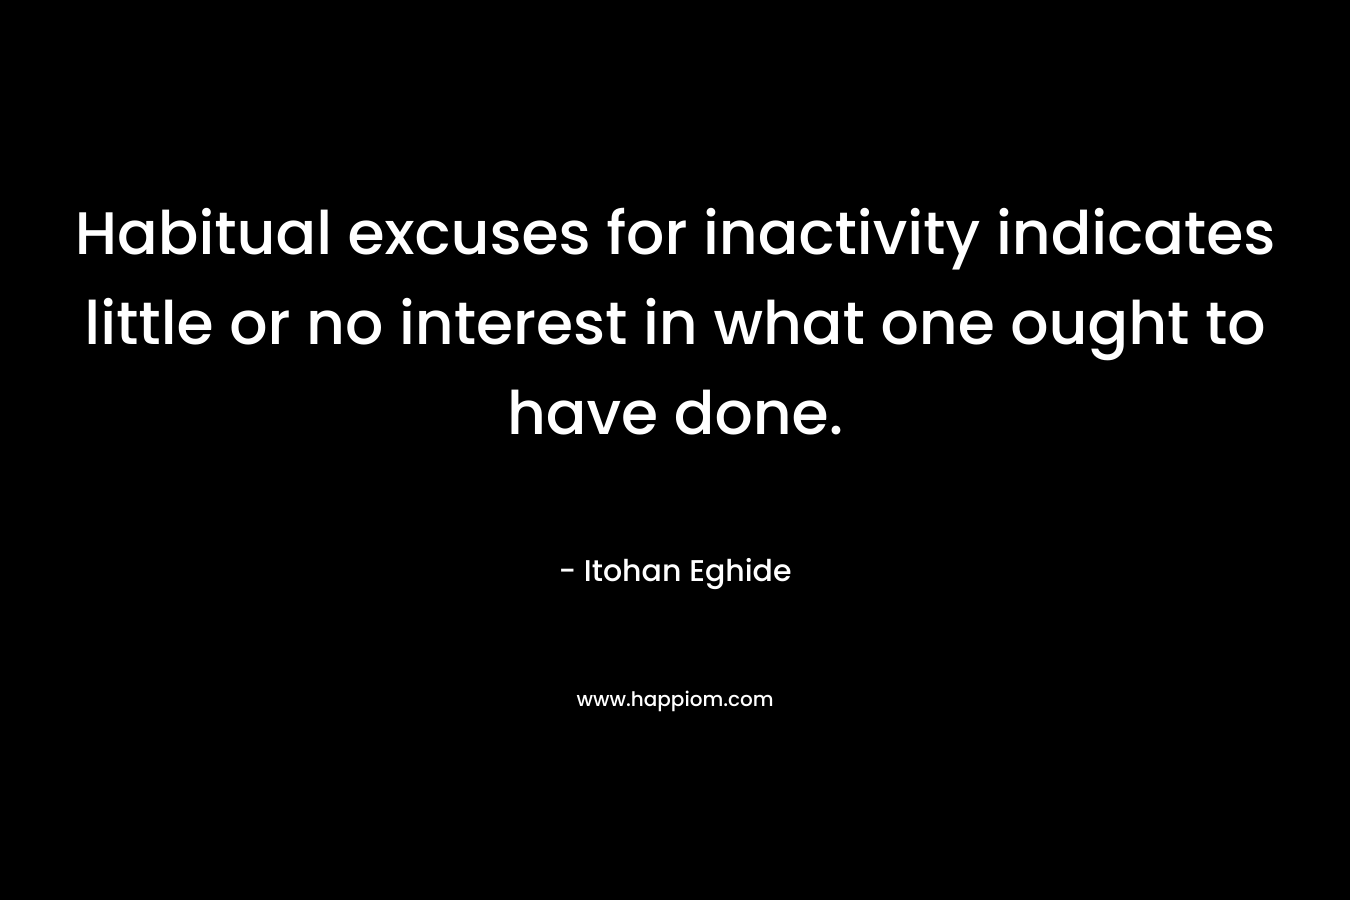 Habitual excuses for inactivity indicates little or no interest in what one ought to have done. – Itohan Eghide